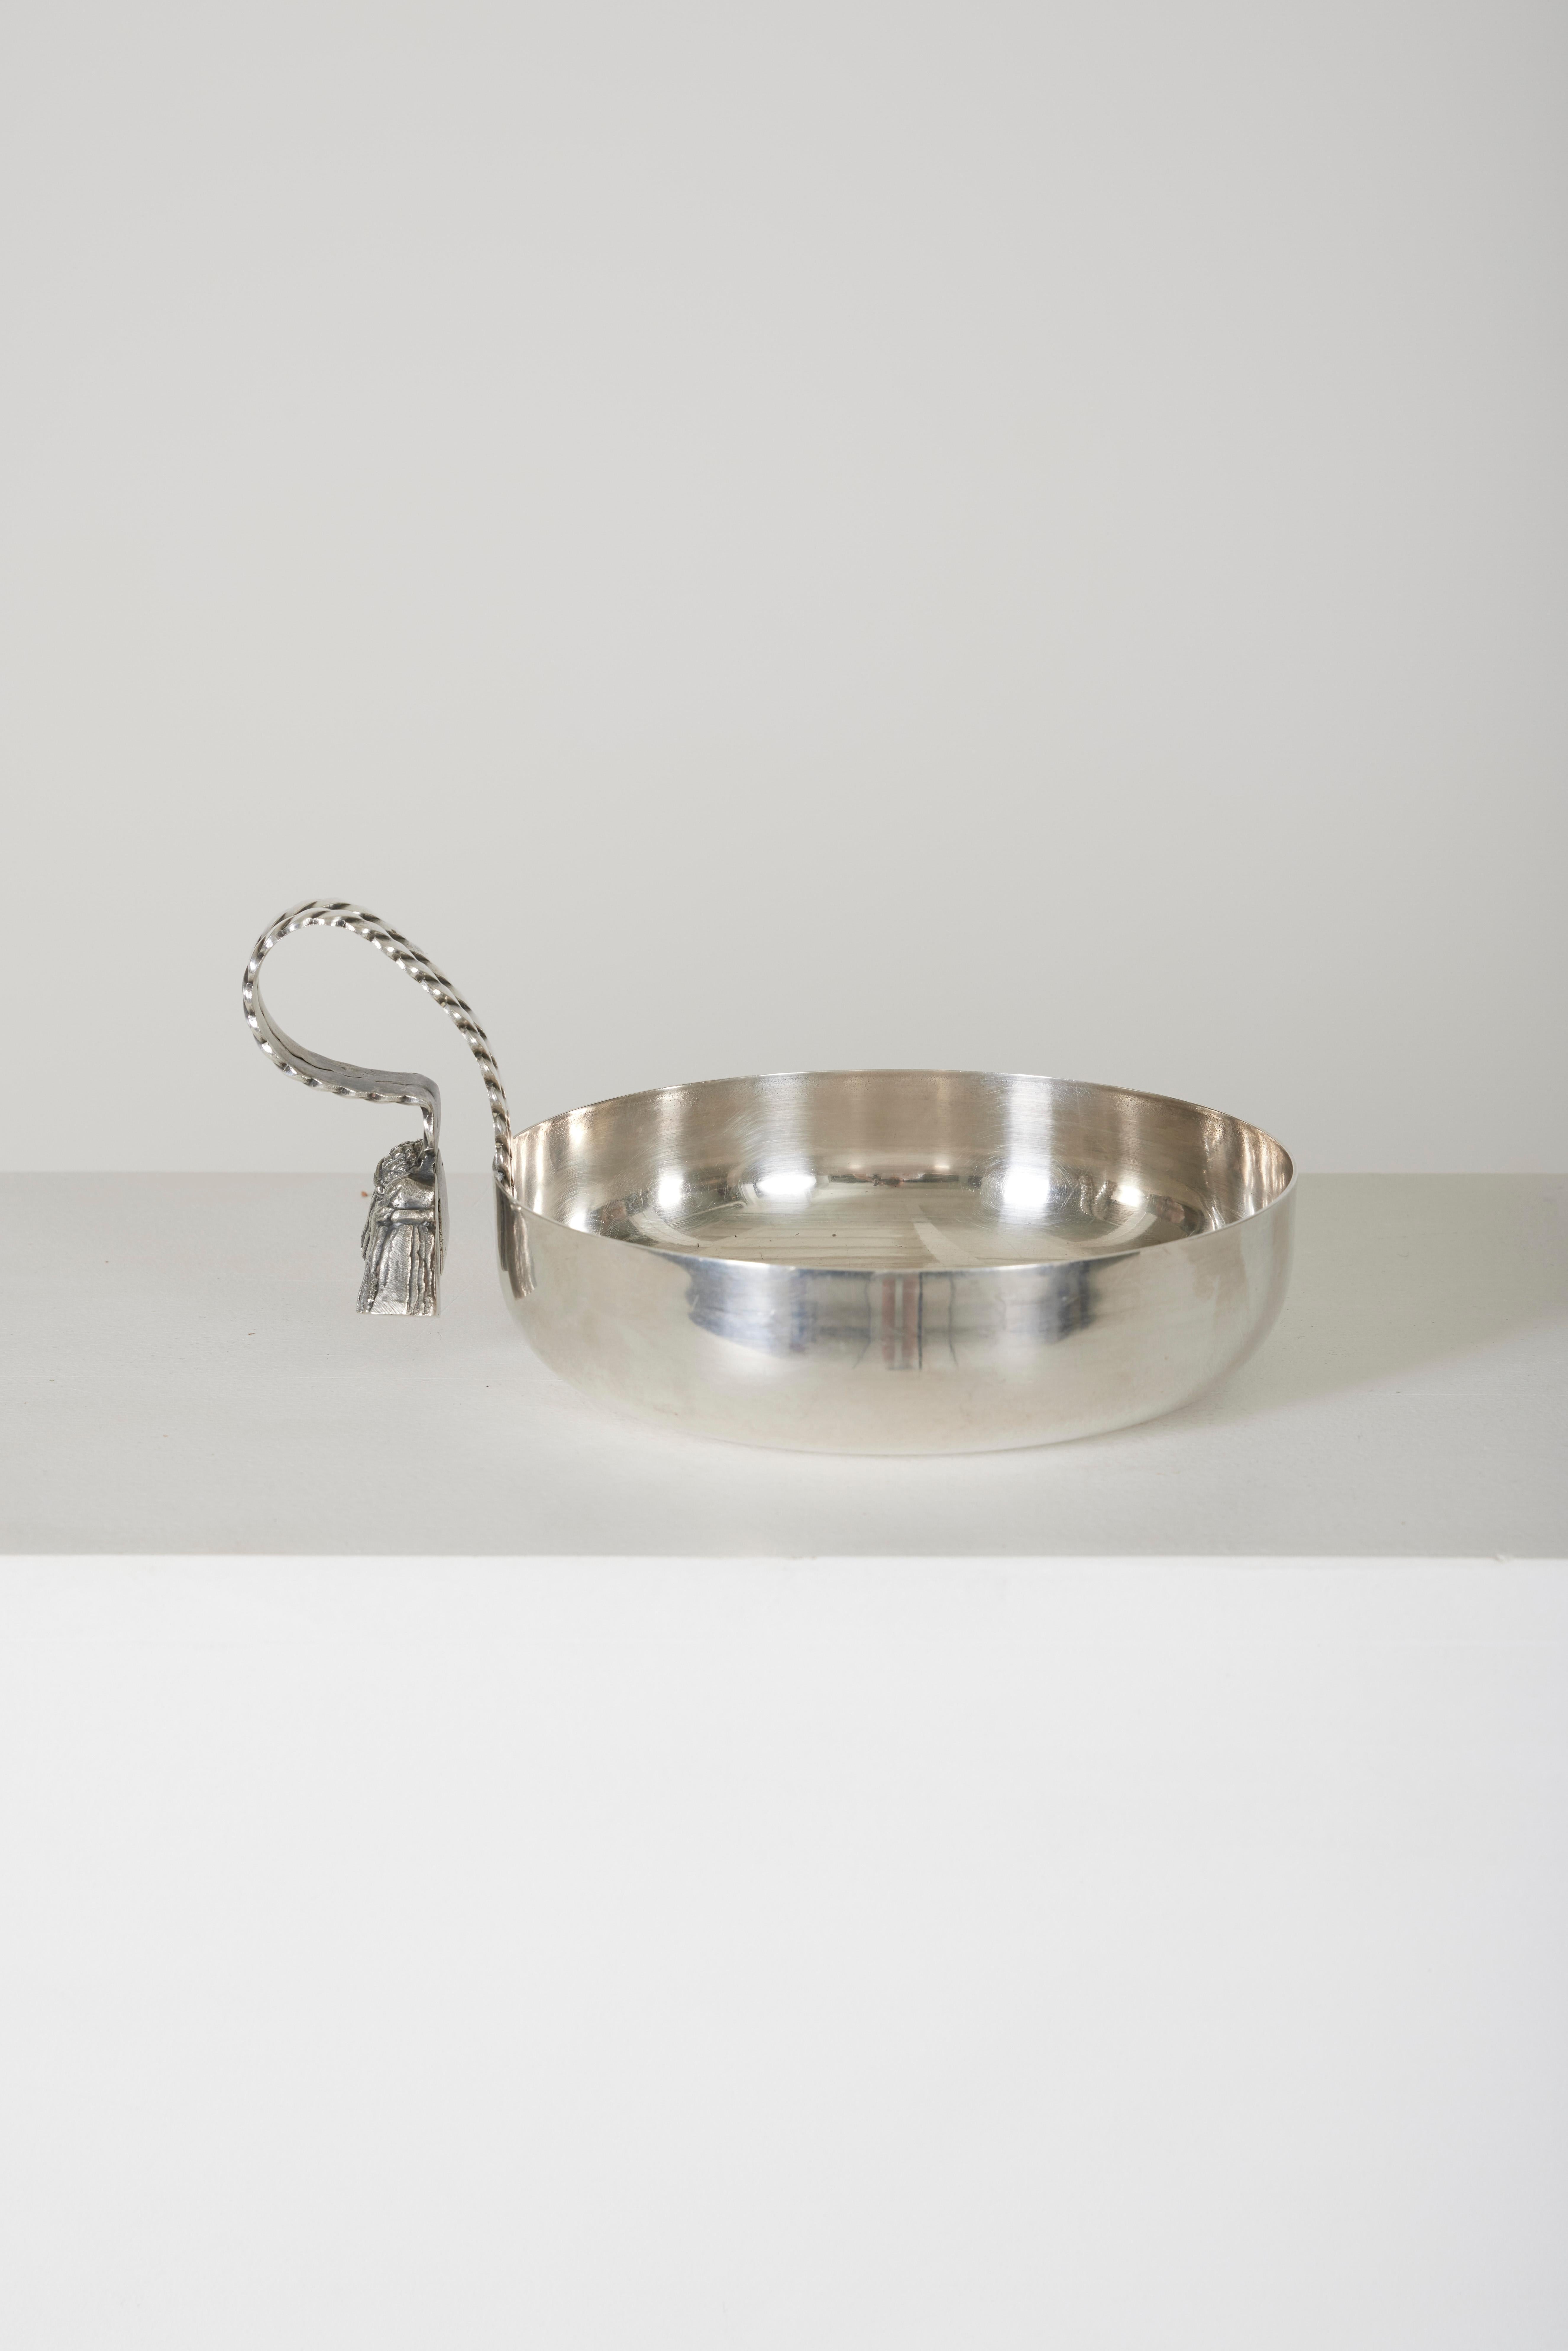 Vide poche designed by Maria Pergay in the 50s/60s. Pocket bowl in silver metal, handle decorated with a bracelet ending in two pompoms, border also decorated with a bracelet. Very good condition.
LP1105